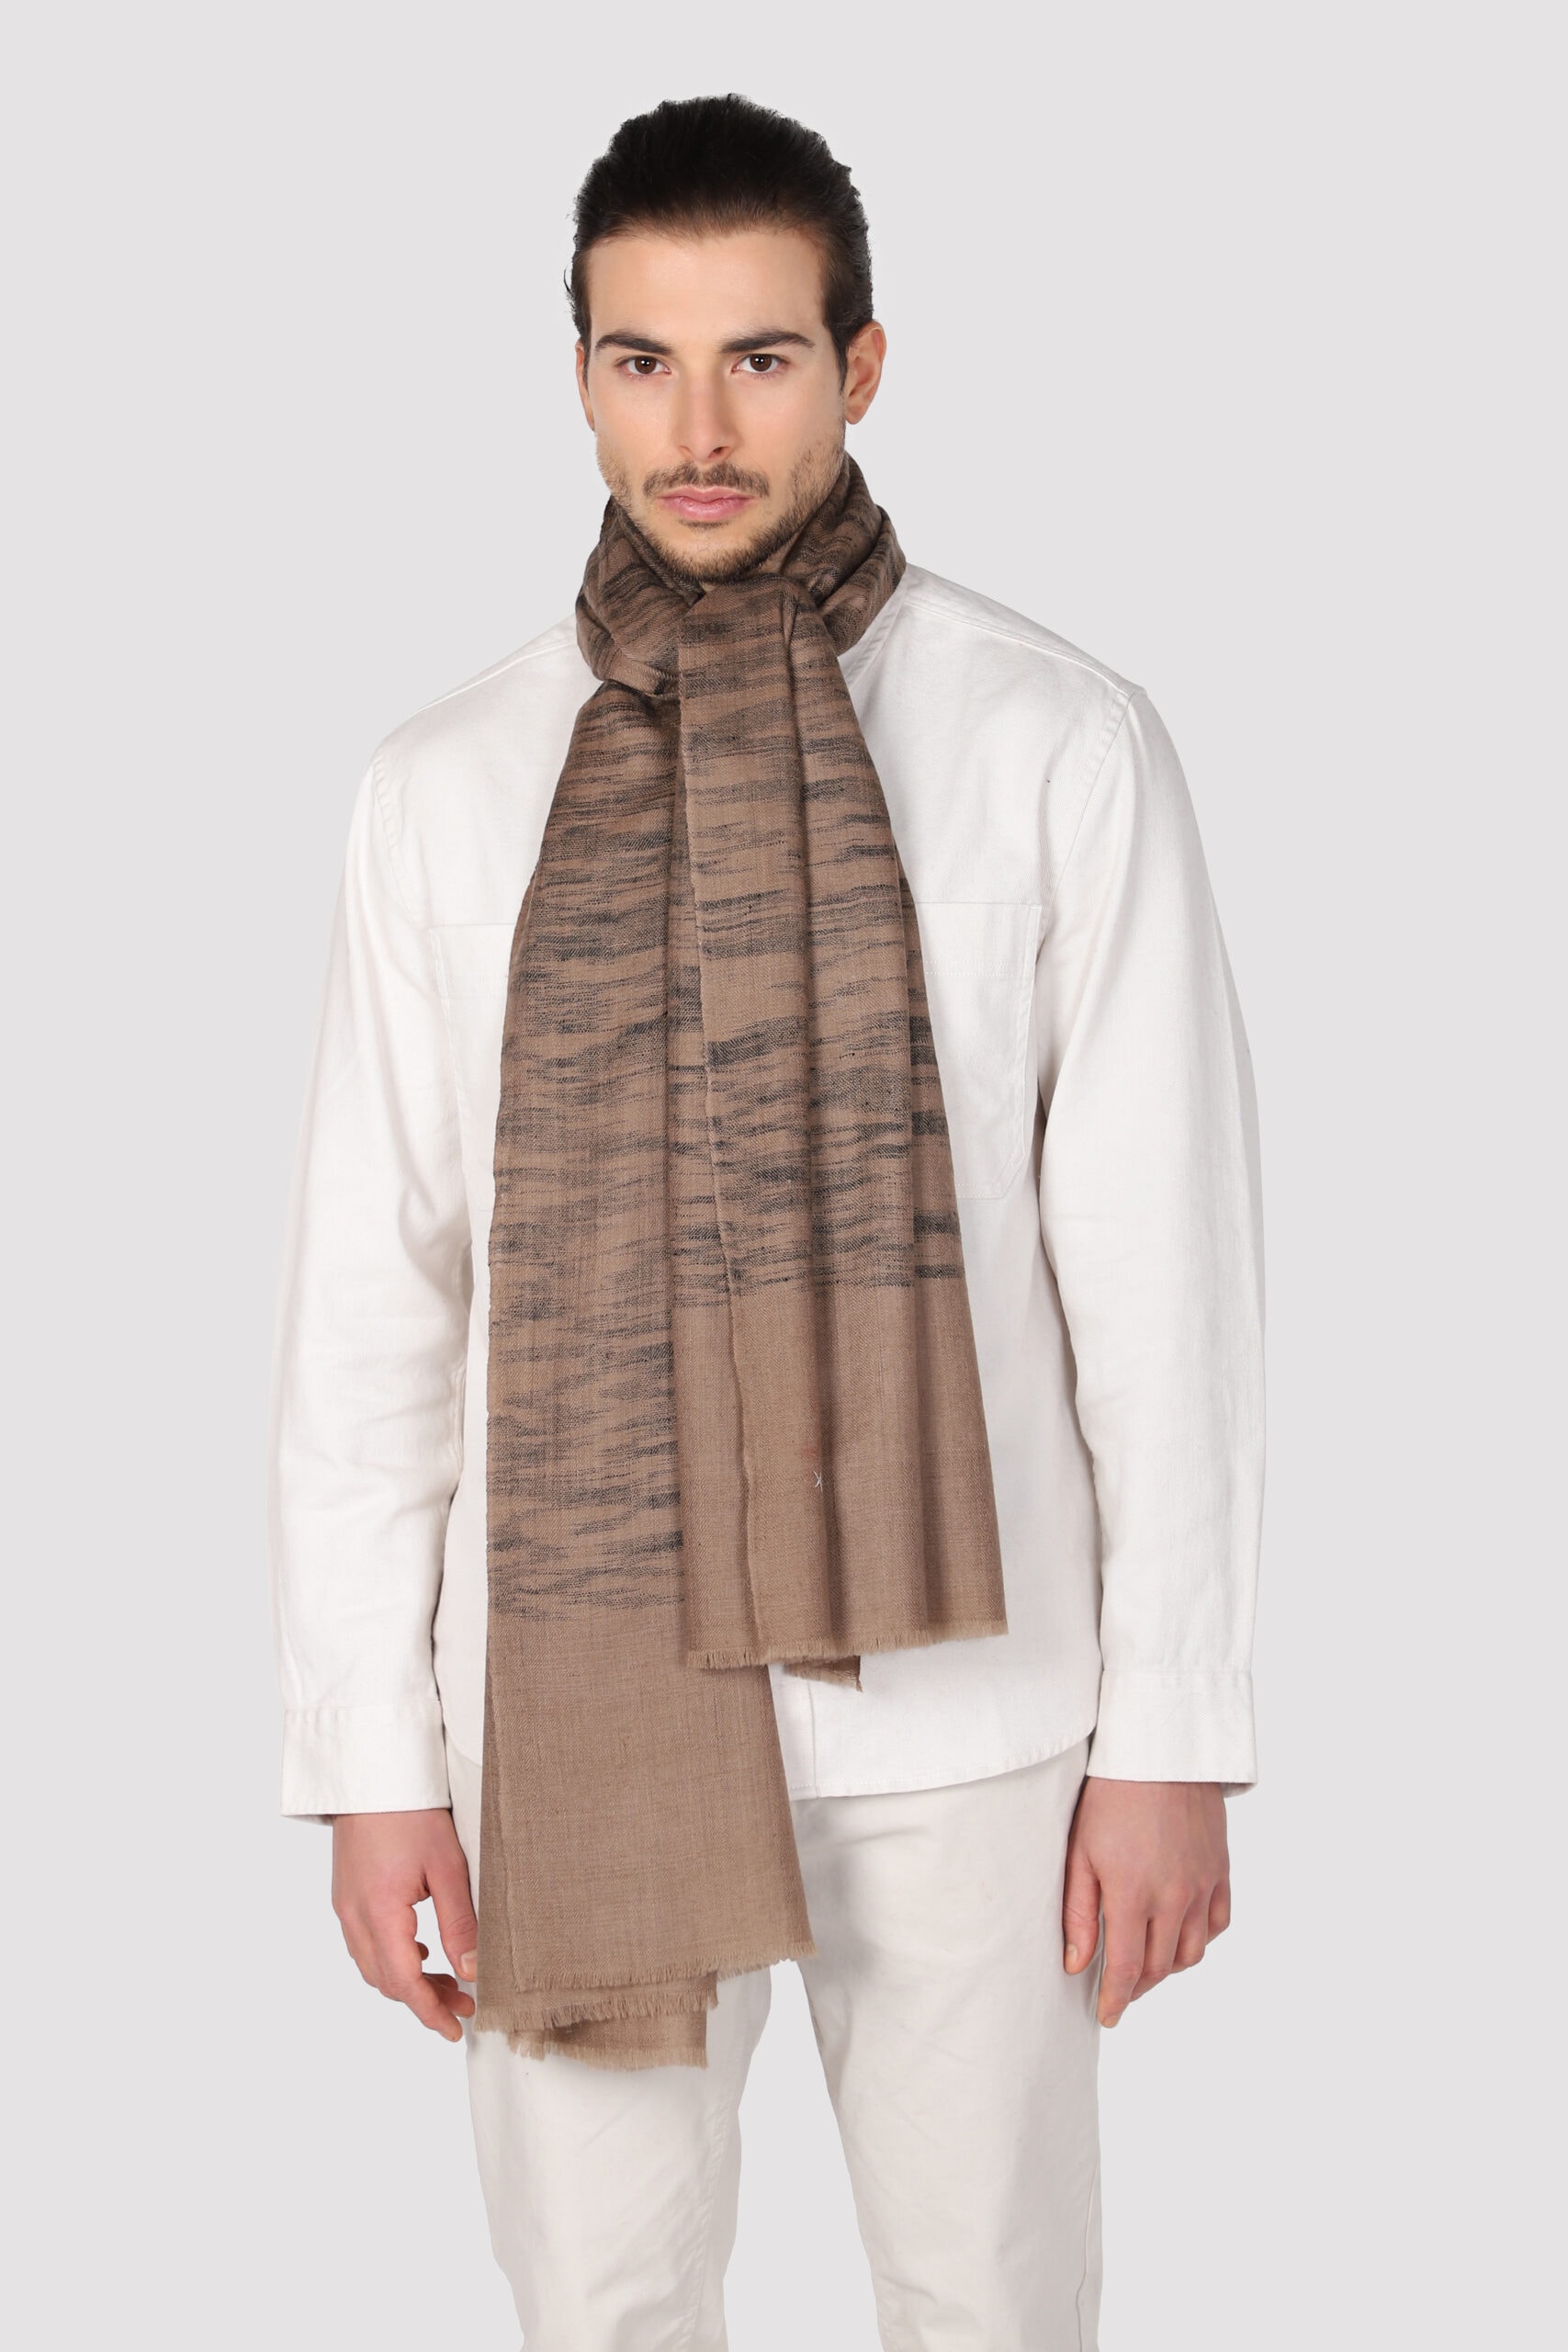 A male model in Ikat shawl with black colored shades scatterred all over the brown surface - MeandK